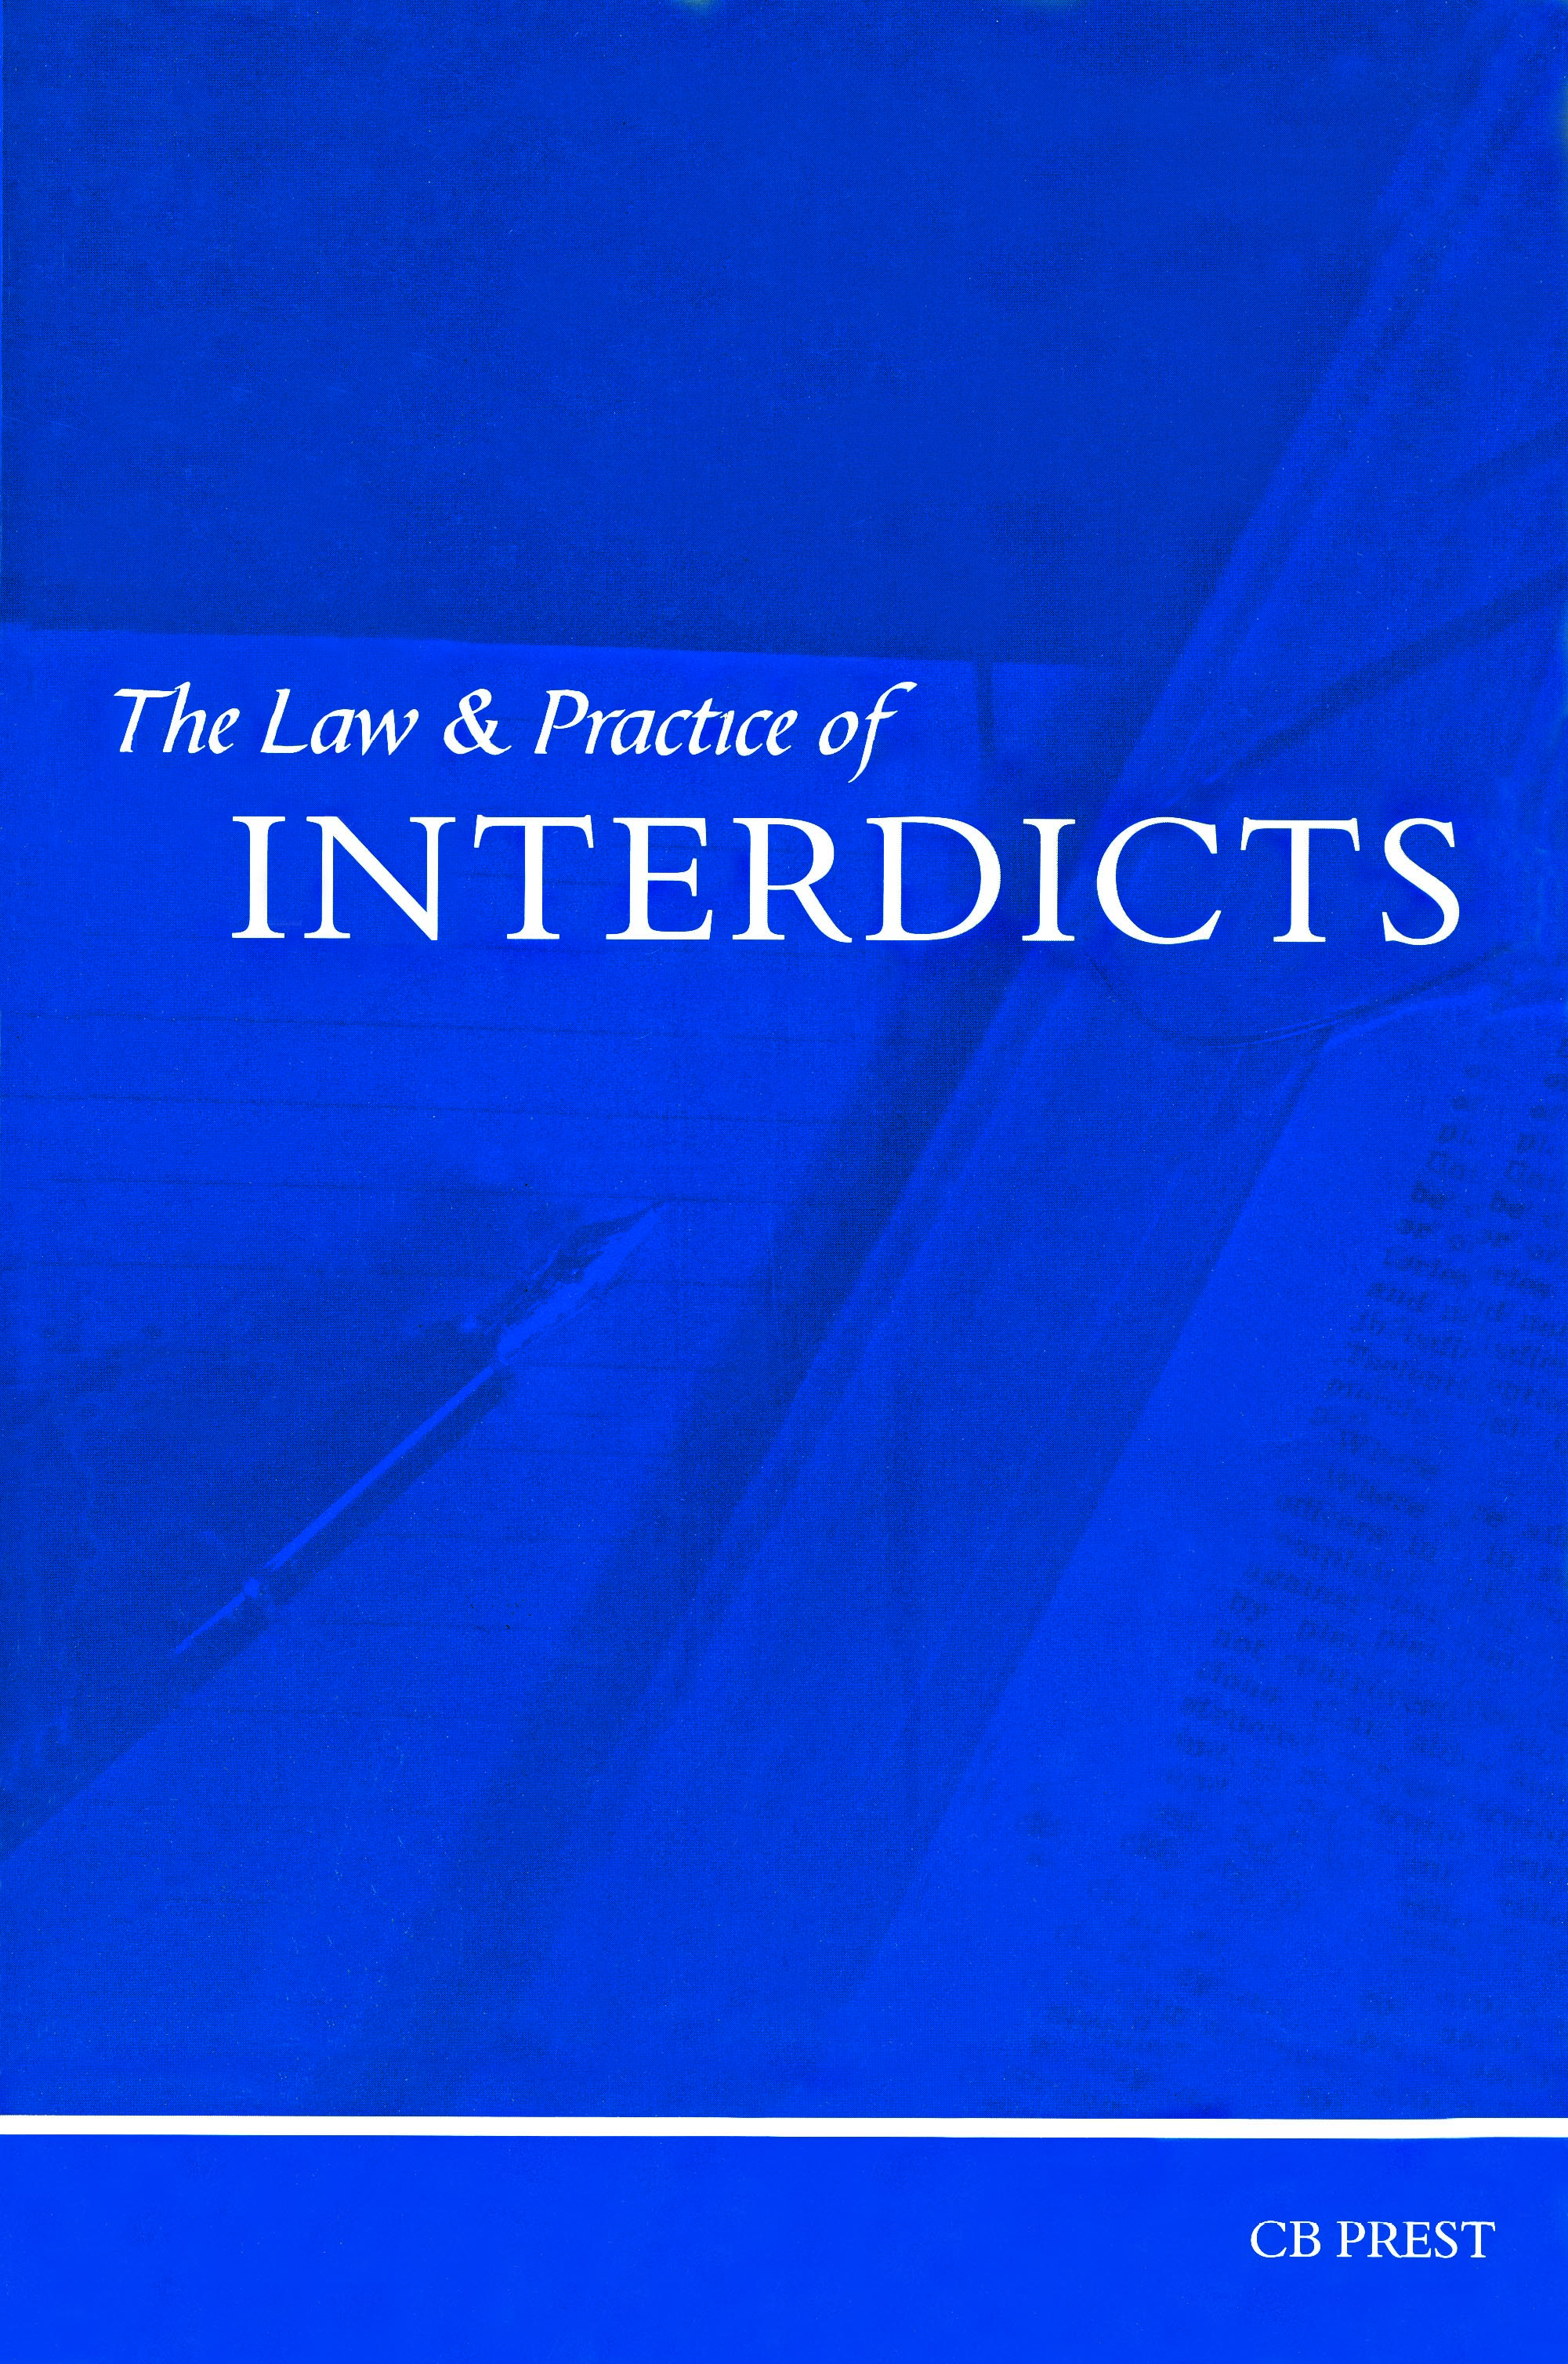 Law and Practice of Interdicts, The